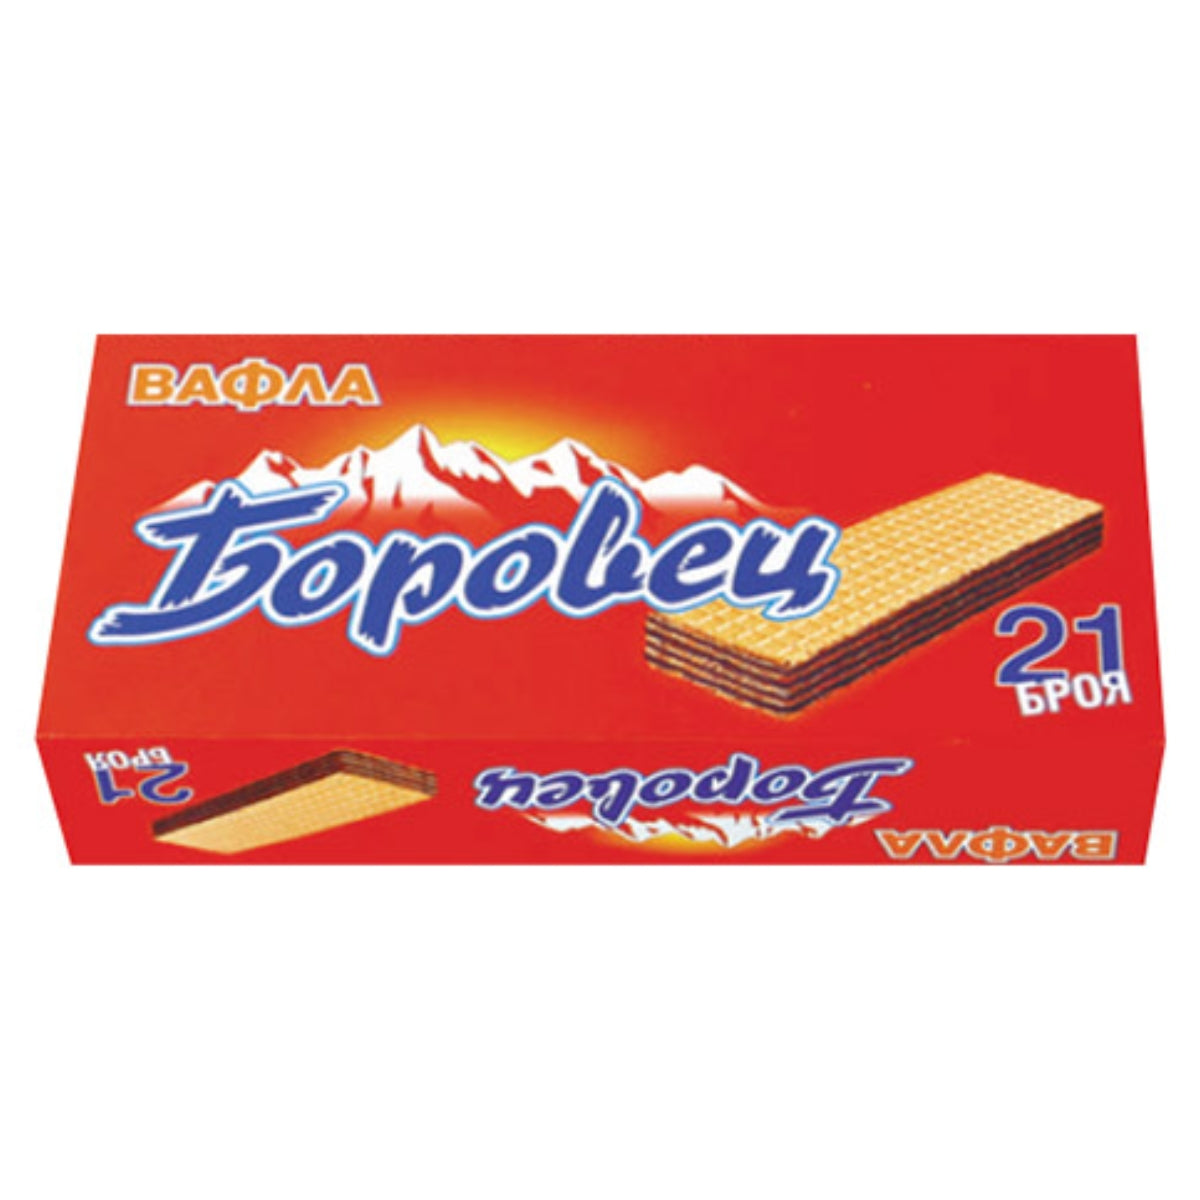 A box of Borovets - Wafers with Peanut - 630g on a white background.